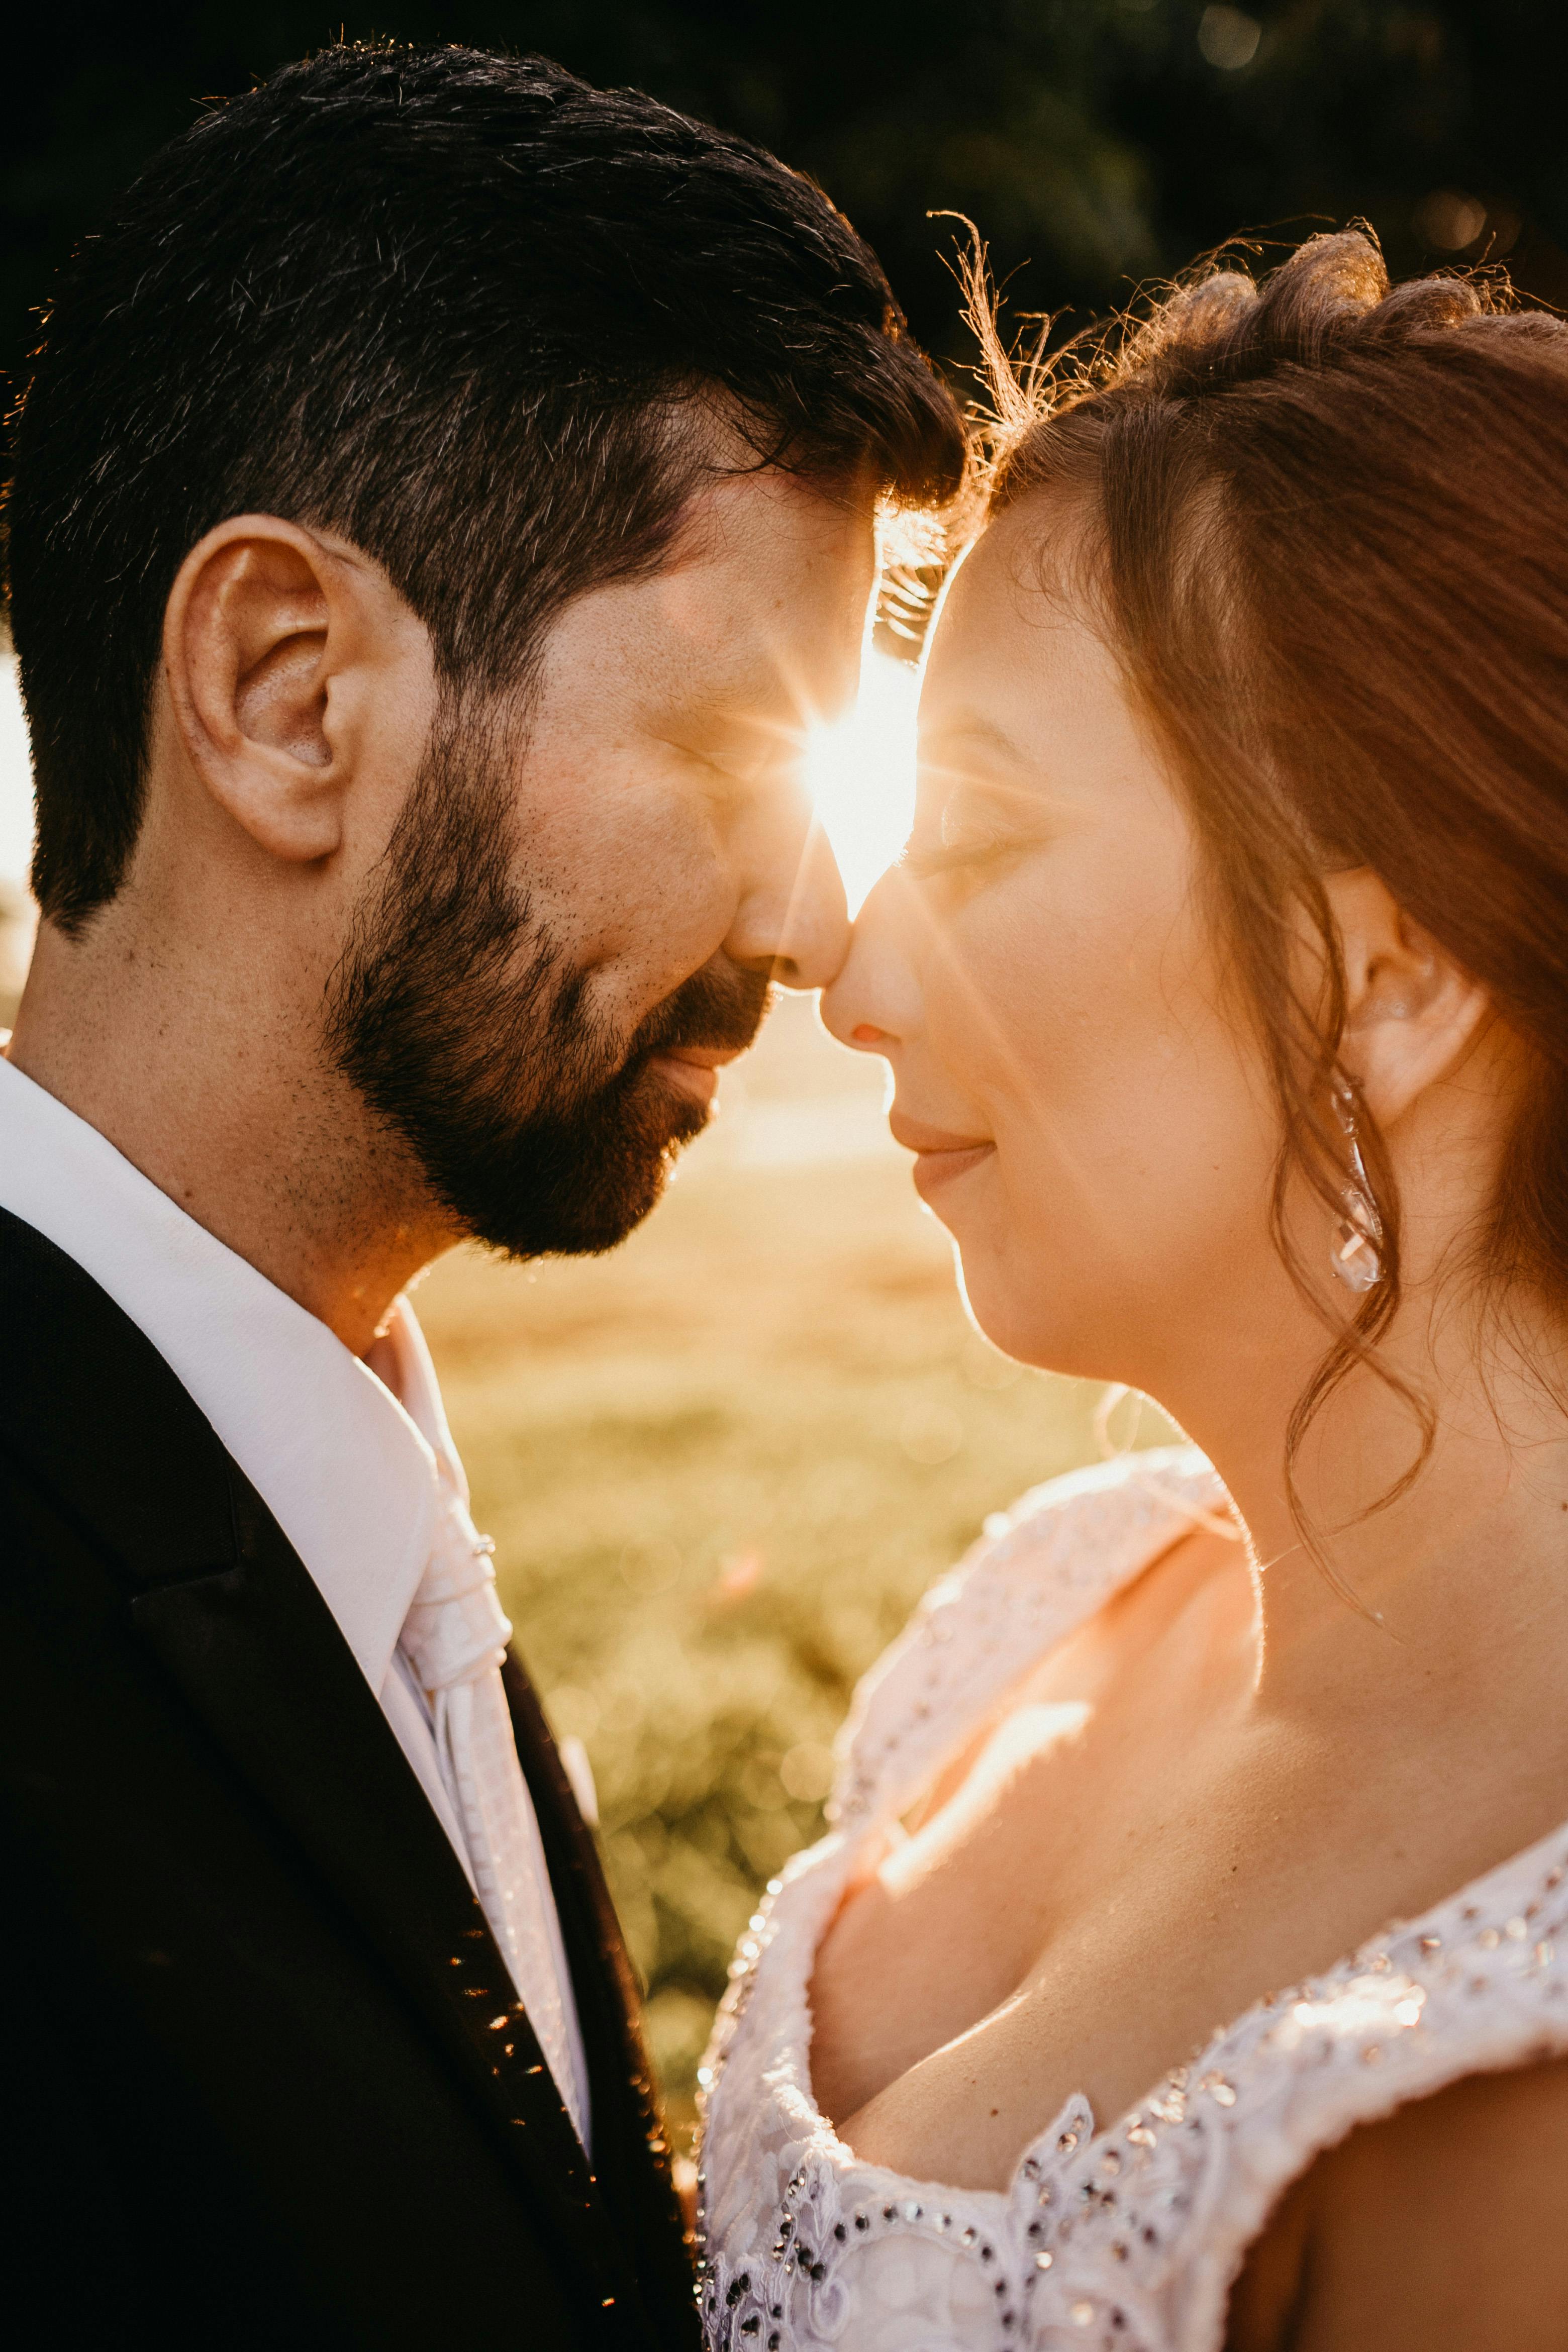 A couple in love | Source: Pexels